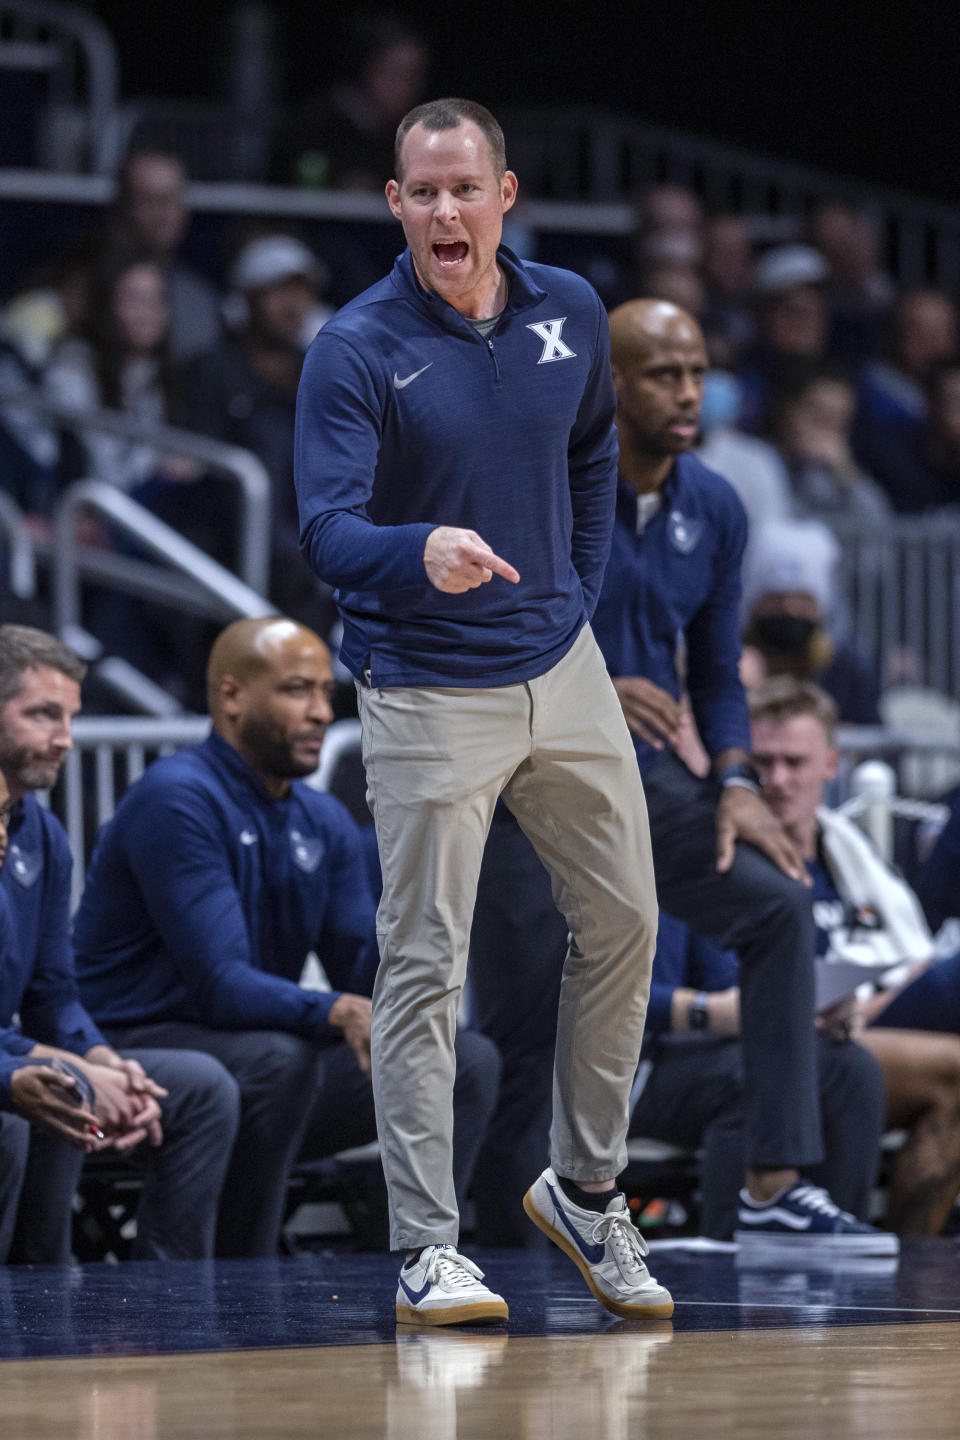 Xavier coach Travis Steele reacts to a call by the officials during the first half of the team's NCAA college basketball game against Butler, Friday, Jan. 7, 2022, in Indianapolis. (AP Photo/Doug McSchooler)